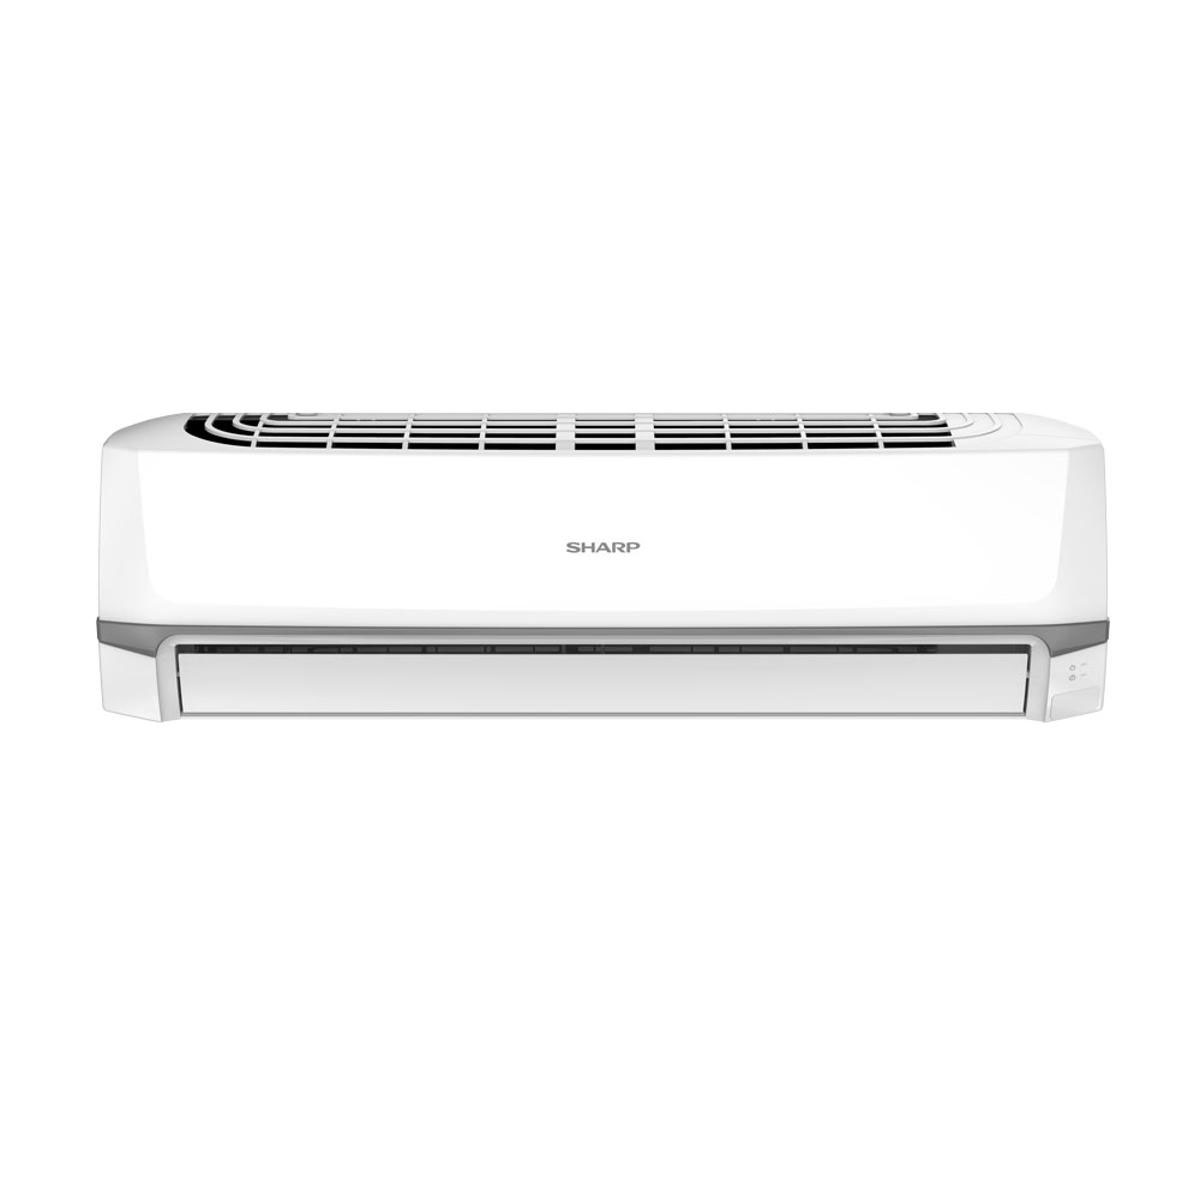 SHARP 1.0 Ton Split Wall Type Air Conditioner AH-A12ZEVE